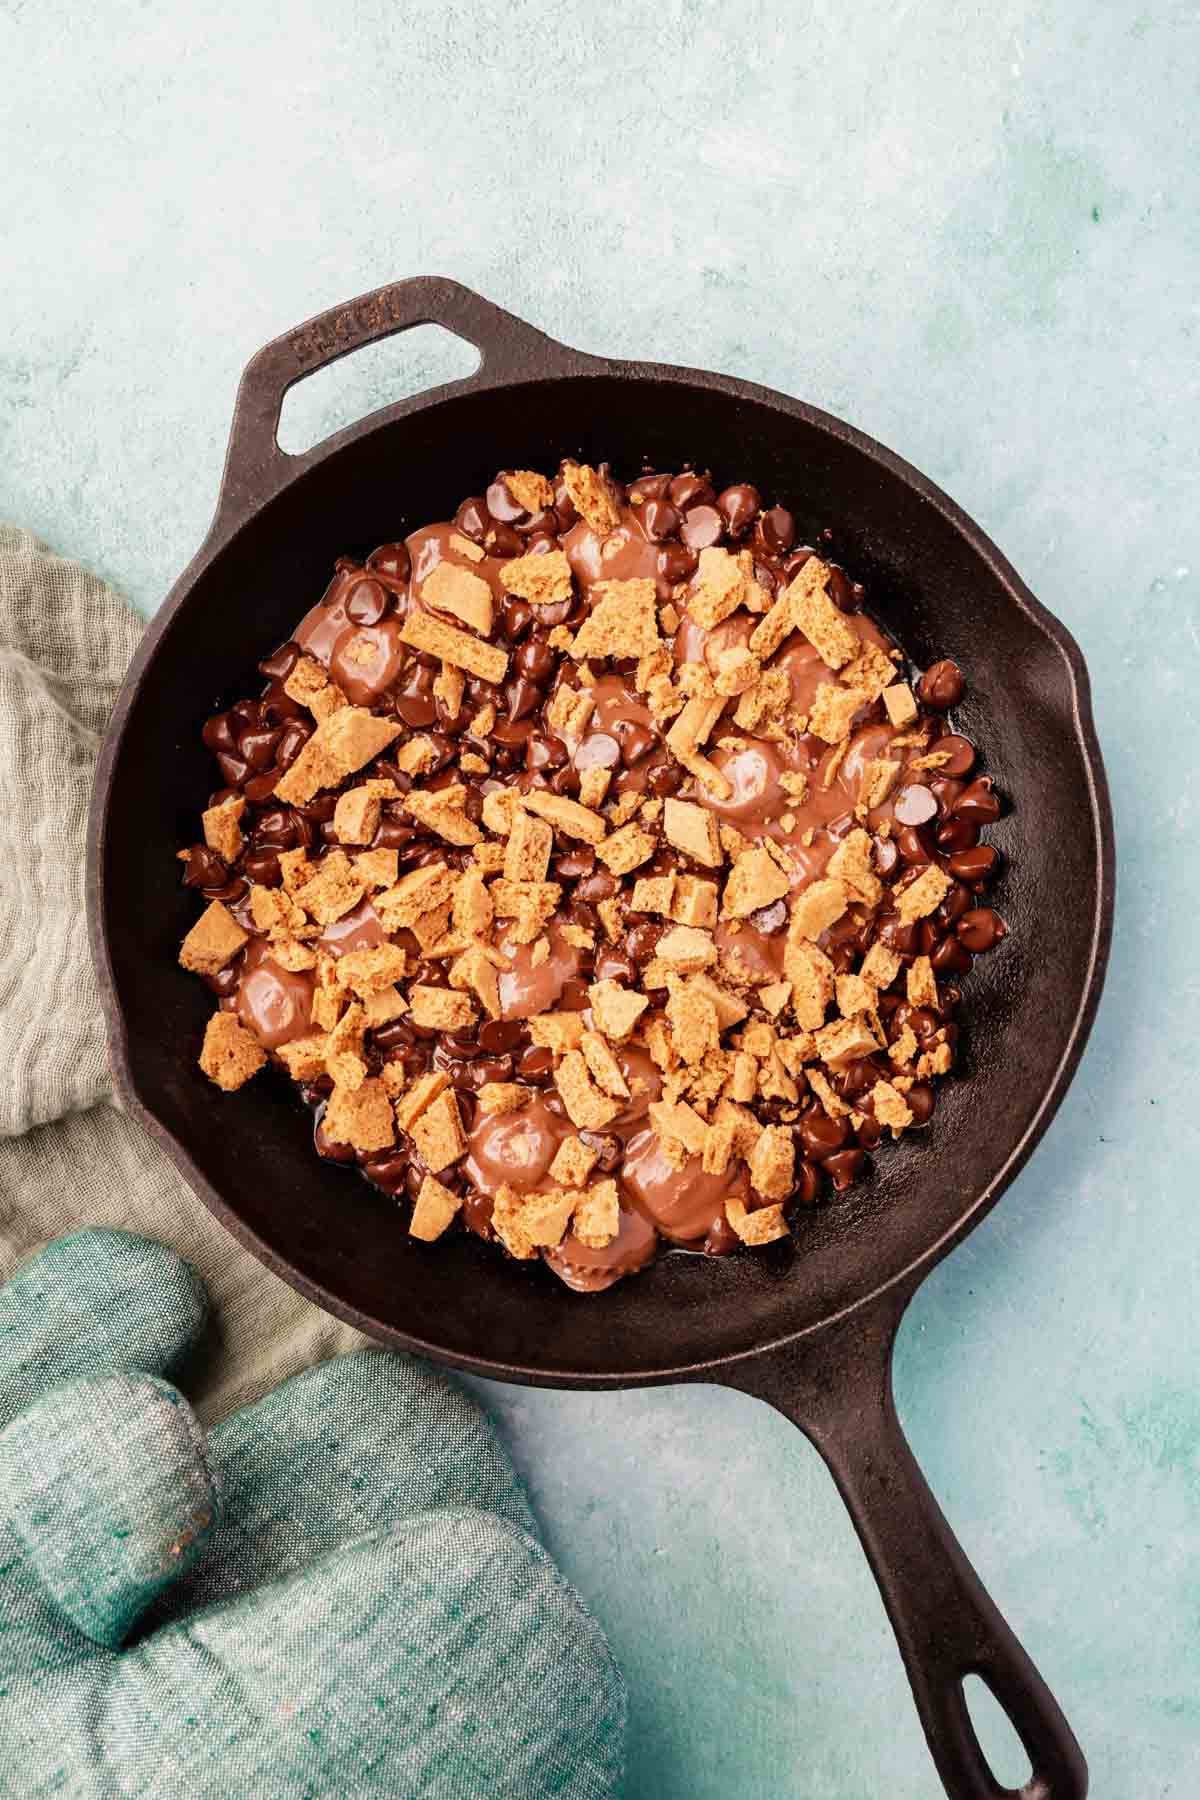 Graham cracker crumbs layered over melted chocolate chips and peanut butter cups in a cast iron skillet.